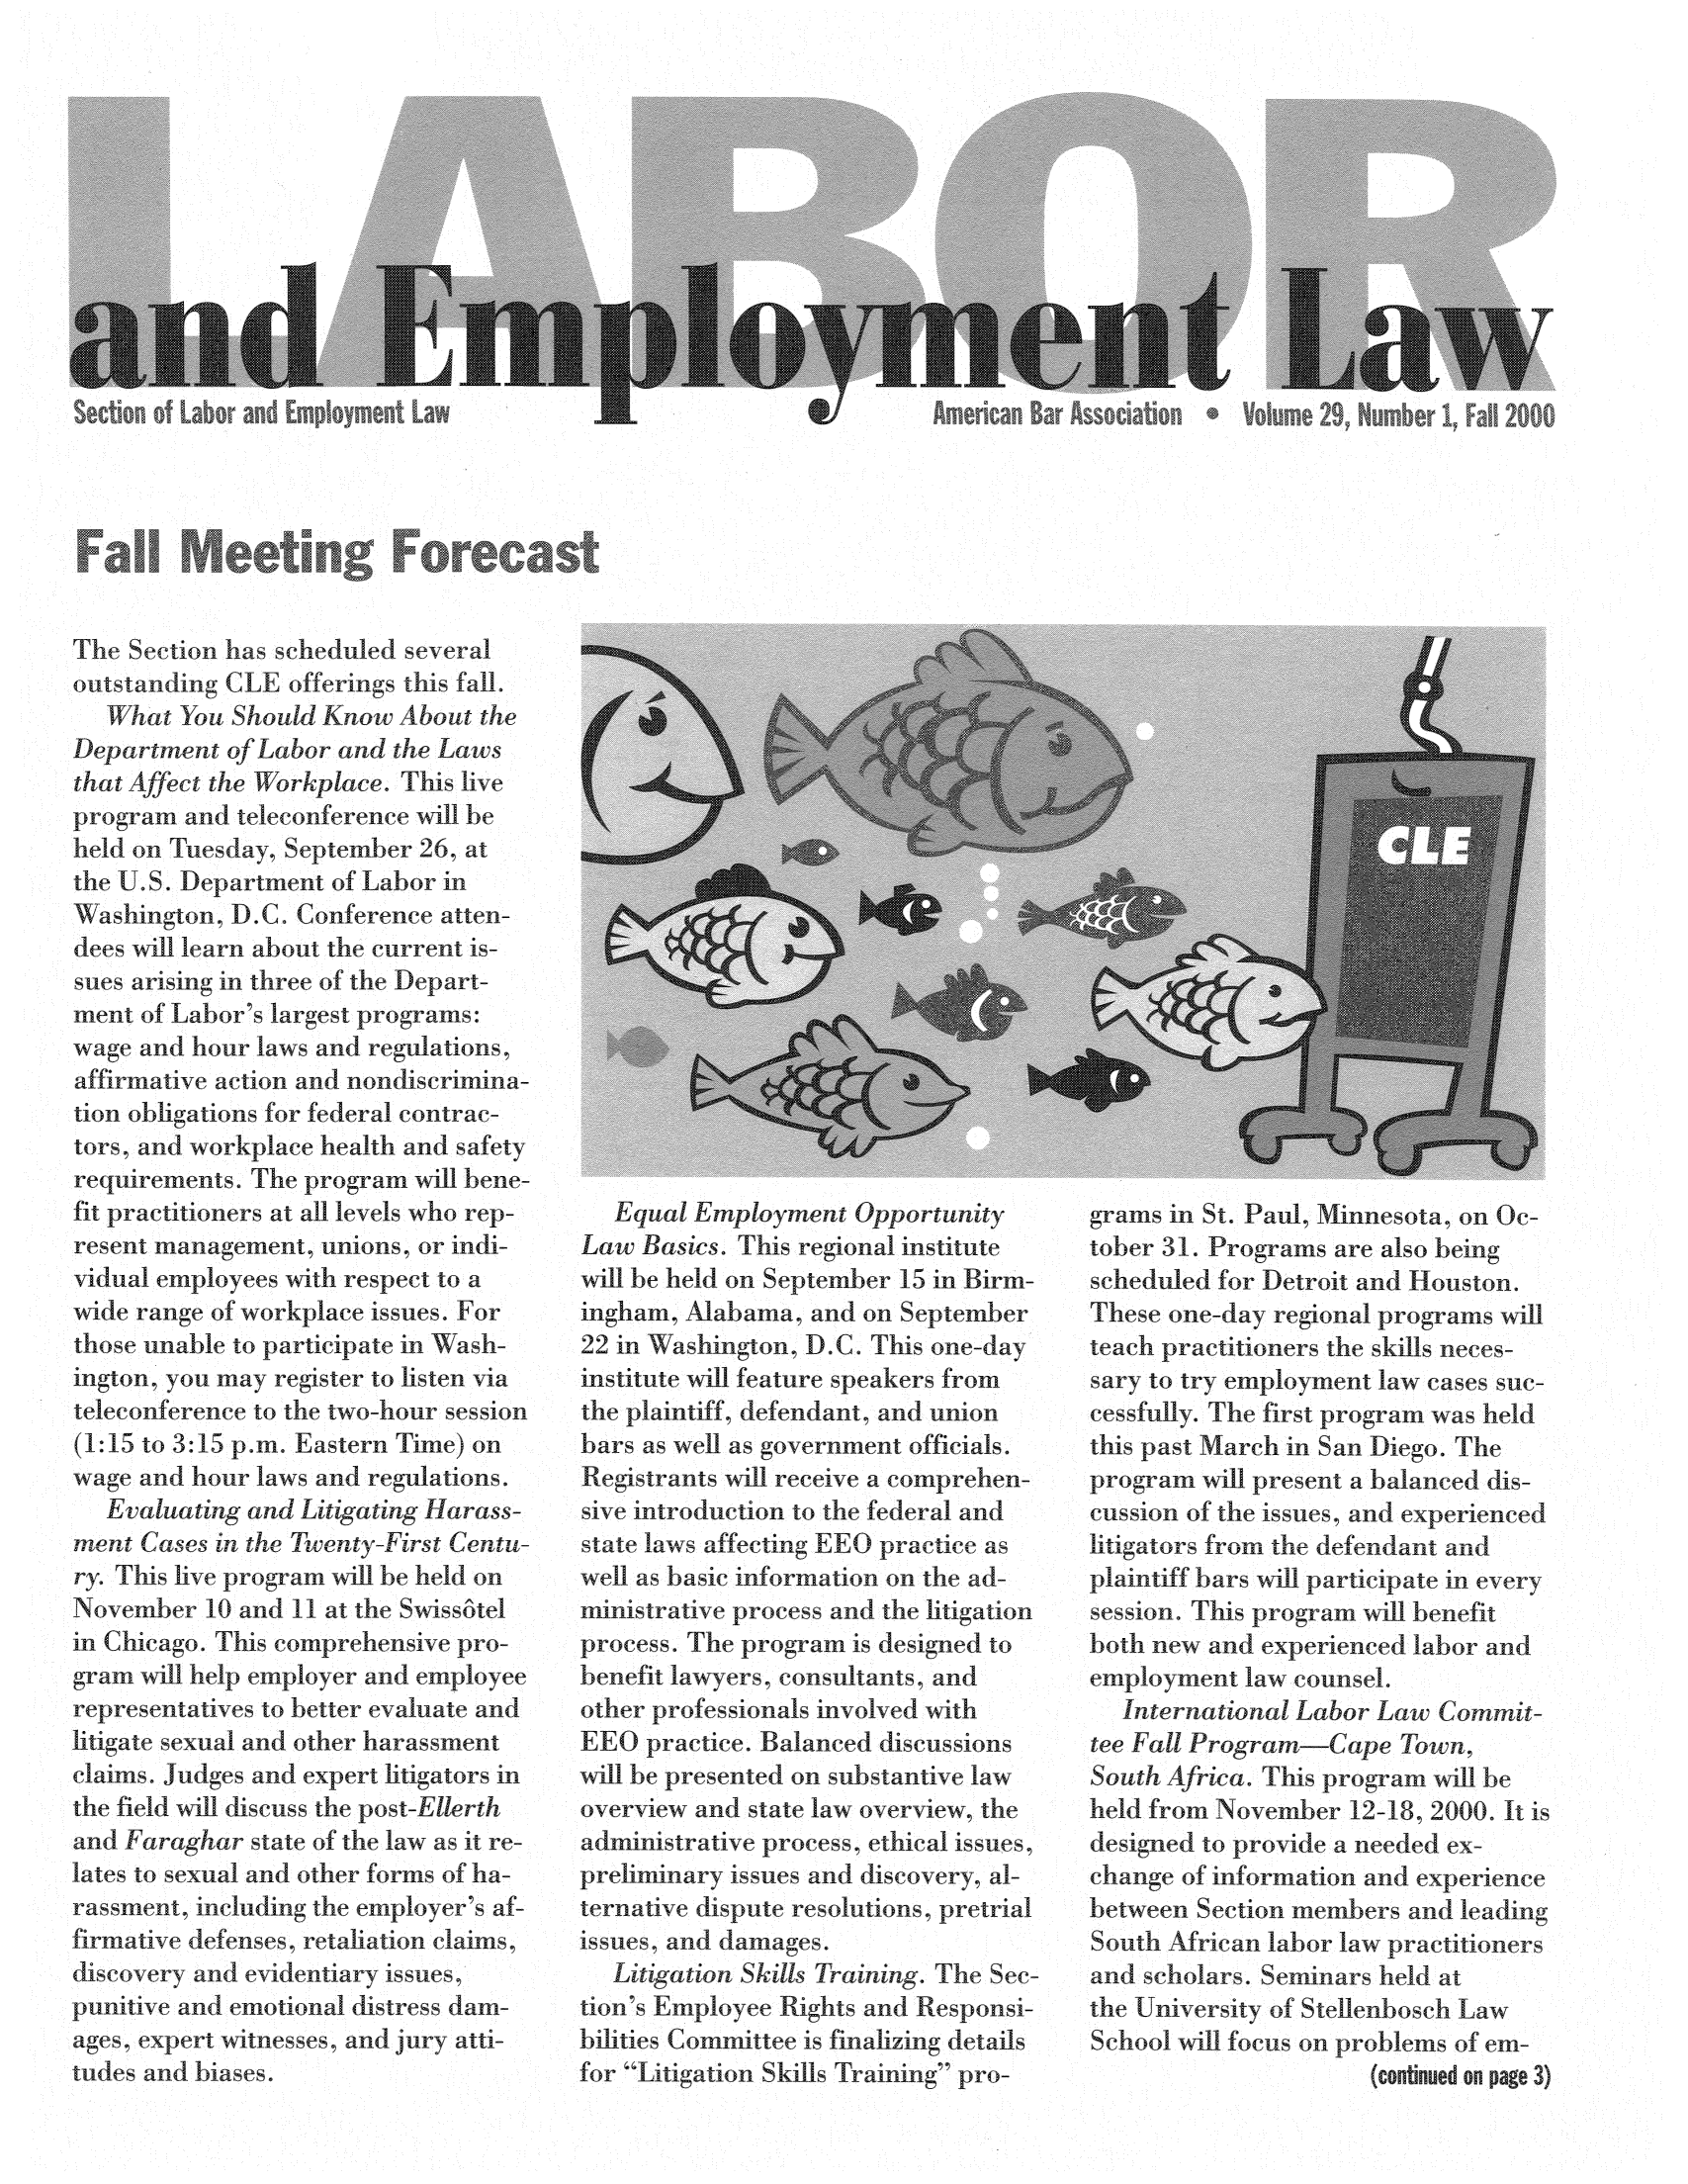 handle is hein.journals/laboemplo29 and id is 1 raw text is: Te Section as schedu ed   everaloutstarding CLE ofterings tthis fall.   What You Shubo Knw1About theDeportment of Labor and the Lawsthat A  ct the Workplace This liveprogram and teleconference  beheld on Tuesday, September 26, atthe U.S. Department of Labor i  ashington, D.C Conference atterdees ill earm about the current ssus arisling in three of the Depart-olnt of LAbors ldrgest prograimwage and hour laws and regulations,aftirmative action and nondiscrimina-tion obgaions for federal contractors, and workplace health and safetyrequirements. The~ program W  bene-fit practitioners at all levels who rep-esent management, unions, or indchvidual employees with respect to awide range of workplace issues. Forthose unable tc participate in Ws-ington you may register to listen viateleconference to the two-our session(1:15 to 3:15 p.m. Eastern Time) onwaIge and hou laws and regulations.   LEvaluating and Litigating Harass-menit Case i the Twenty First Ccntury This hive program wil.1 be eld onNoven er 10 and 11 at the Swissotelin Cicago This comprehensive progra  v   help employer and employeerepresentatives to better evaluate anditigate sexual and other harassmentelai   Judges and expert litigators ithe field   discuss the post-Ellerthand Faraghar state of the law as it re-late to sexual and other forms of ha-rassment, includ'g the employer's affirmnative defenses, retaliation claisdiscovery and evideutiary issespunitive and emotional distress dam-ages, expert witnesses, and jury atti-tudes and bia~ss   Equal Employment OpportunityLaw Basics. This regional institutewil be held on September 15 in Birm-ingham, Alabama, and on September22 in Wash gtn, D.C, This on-dayinstitute f feature speakers fromthe plaintiff, efendant and unionbars as well as government officials.  eistrants w  receive a comprehen-siv introdnction to the federal andstate law affecting LEO practice awell as basic information on the ad-wnistrative process and t e hitigationprocess. The program is designed tobenefit lawyers e onsultants, andother professionals involved withEEO practice Balanced discussionsbll he presented on substantive lawoverview and state law overview, thead istrative pro.ess, ethical issues,pre    nary issues and discovery, alternative dispute resolutions, pretriaissues and amages.   Litigatior Skills Trainn. The Sec-tion' s Employee Rights and esponsi-bilities Co  ttee is fnaizing detaisfor Litigation Skis Training pro-grams in St. Paul,  nnesota, on Getober 31. Programs are also beingscheduled for Detroit and Houston.These one-day regional programs willte~ach practitioners the s1s necessary to try employment law cases sue-cessf y. The first program was heldthis past March in San Diego. Theprogram wif present a balanced diseuss on of the isses, Id experienedhitigators from thc defendant andplaintiff bars wi participate in everysession. This program wil benefitboth new and experienced labor andcmployment law counsel.   International Labor 1Law Commit-tee Fall Program-Cape Town,South Africa. This programwl beheld from November 12-18, 200. It isdcsigned to provide a needed exchange of information and experienicebetween Section members anid leadingSouth  Arican labor law practitionersand sciholars. Seriinars held atthe University of Stellenbosch LawSchool w   focus on problems of em-                      (continued on page 3)